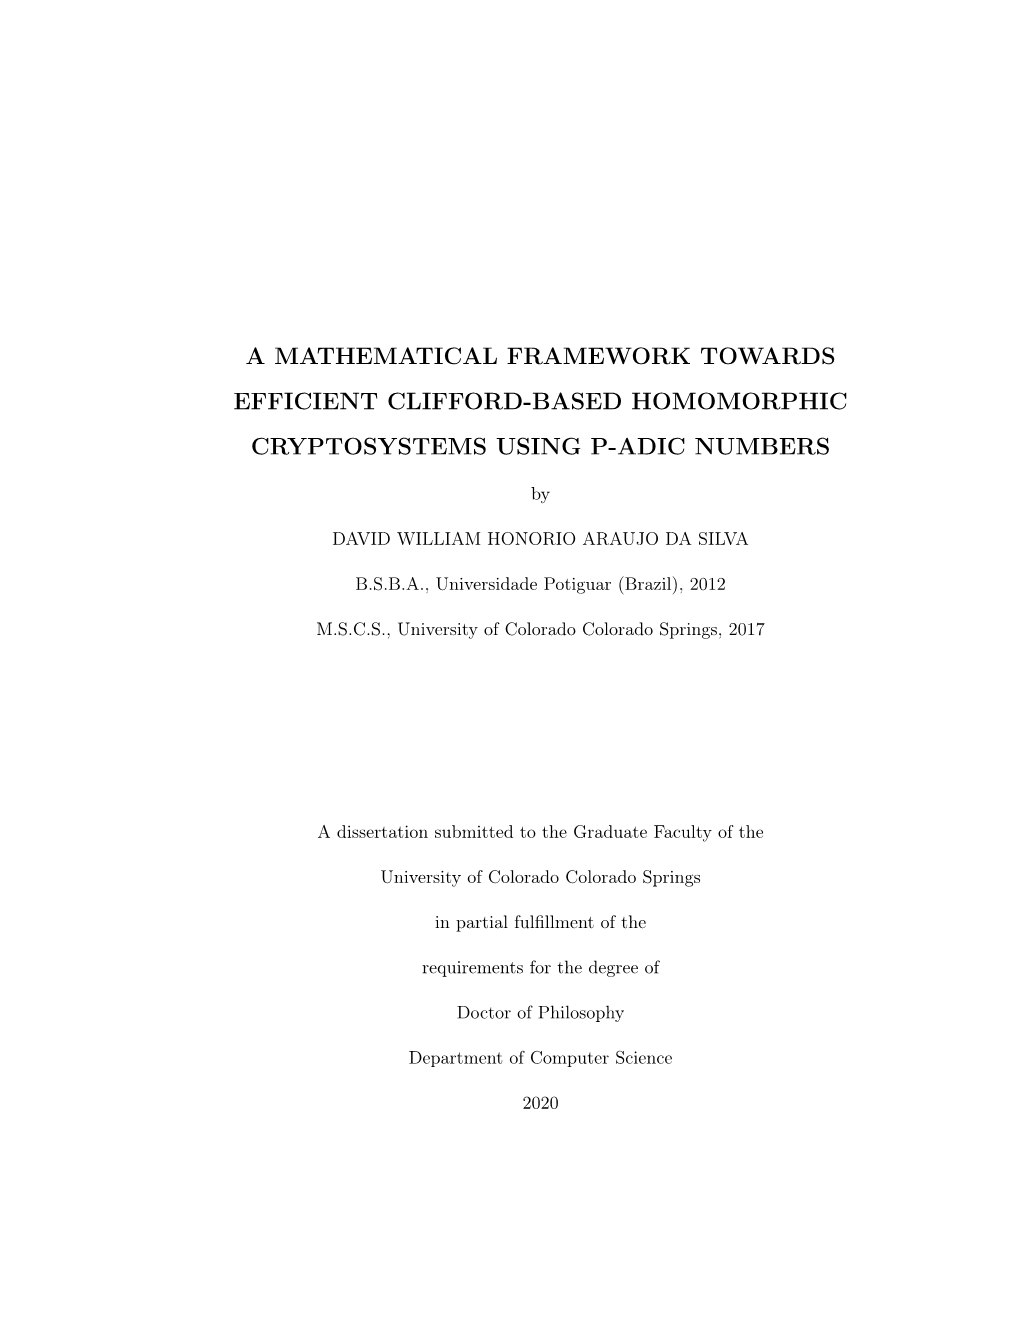 A Mathematical Framework Towards Efficient Clifford-Based Homomorphic Cryptosystems Using P-Adic Numbers